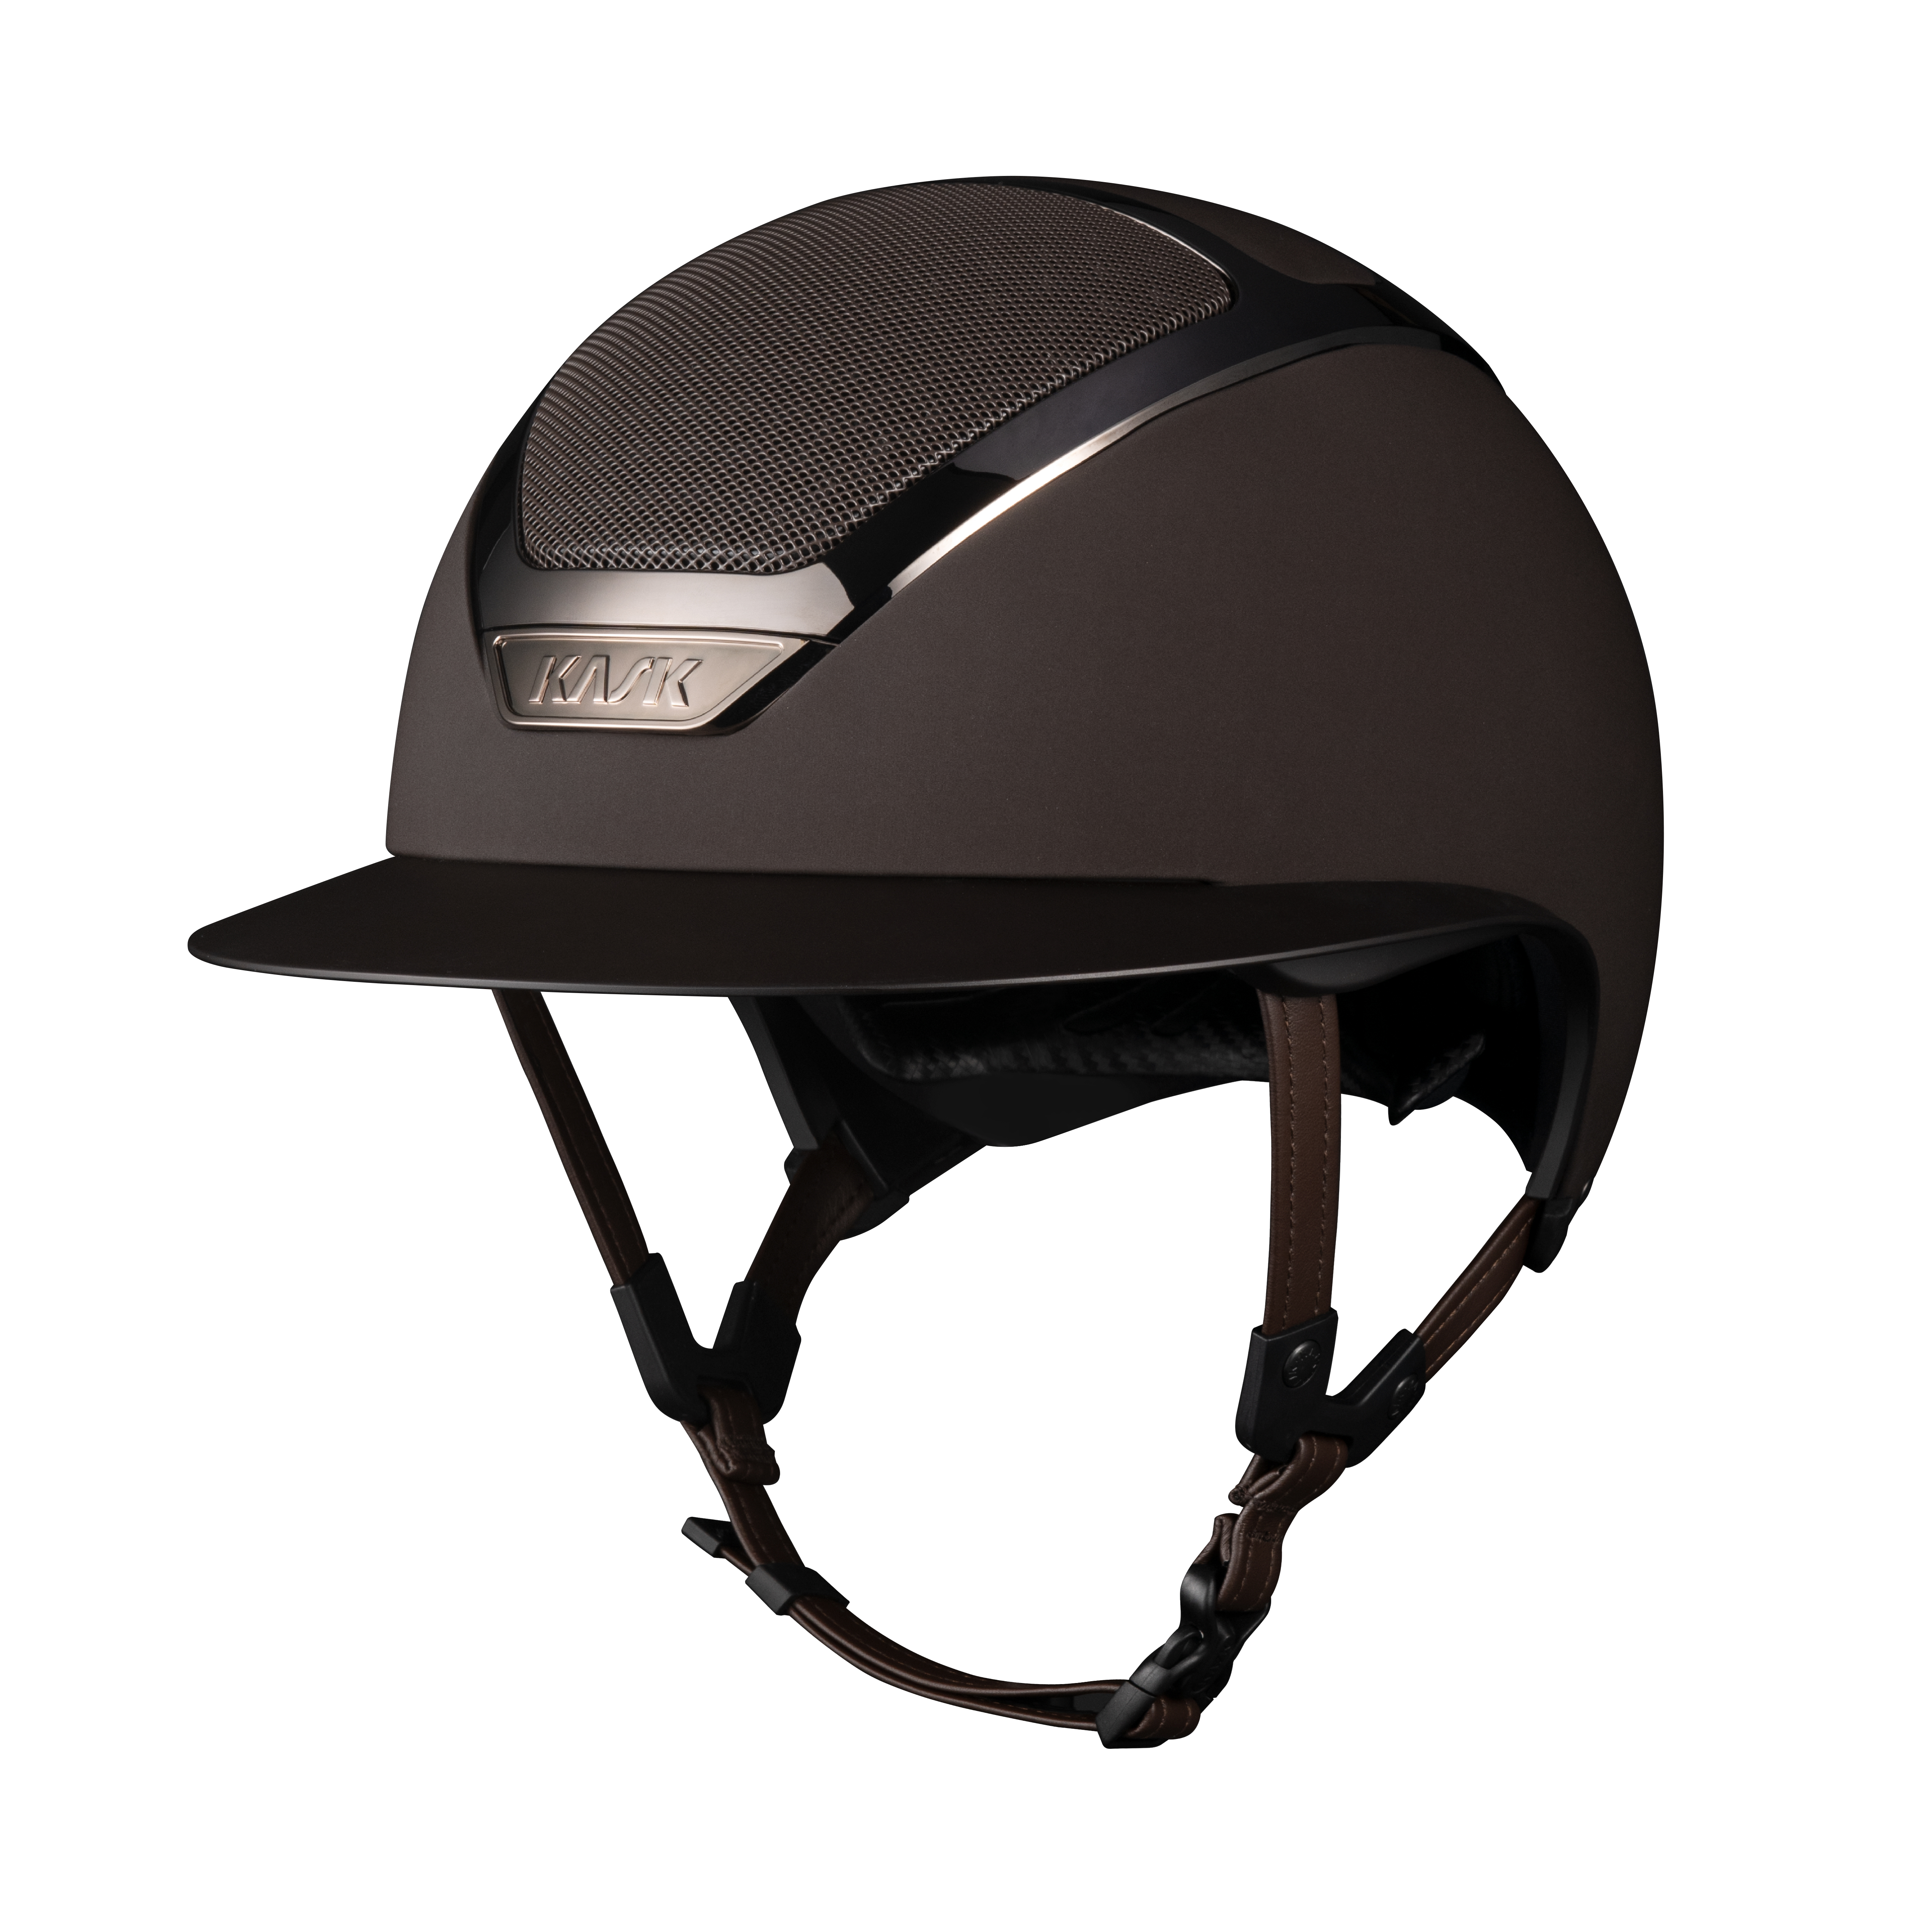 KASK Kask Reithelm Star Lady Chrome - brown - 55 - 2